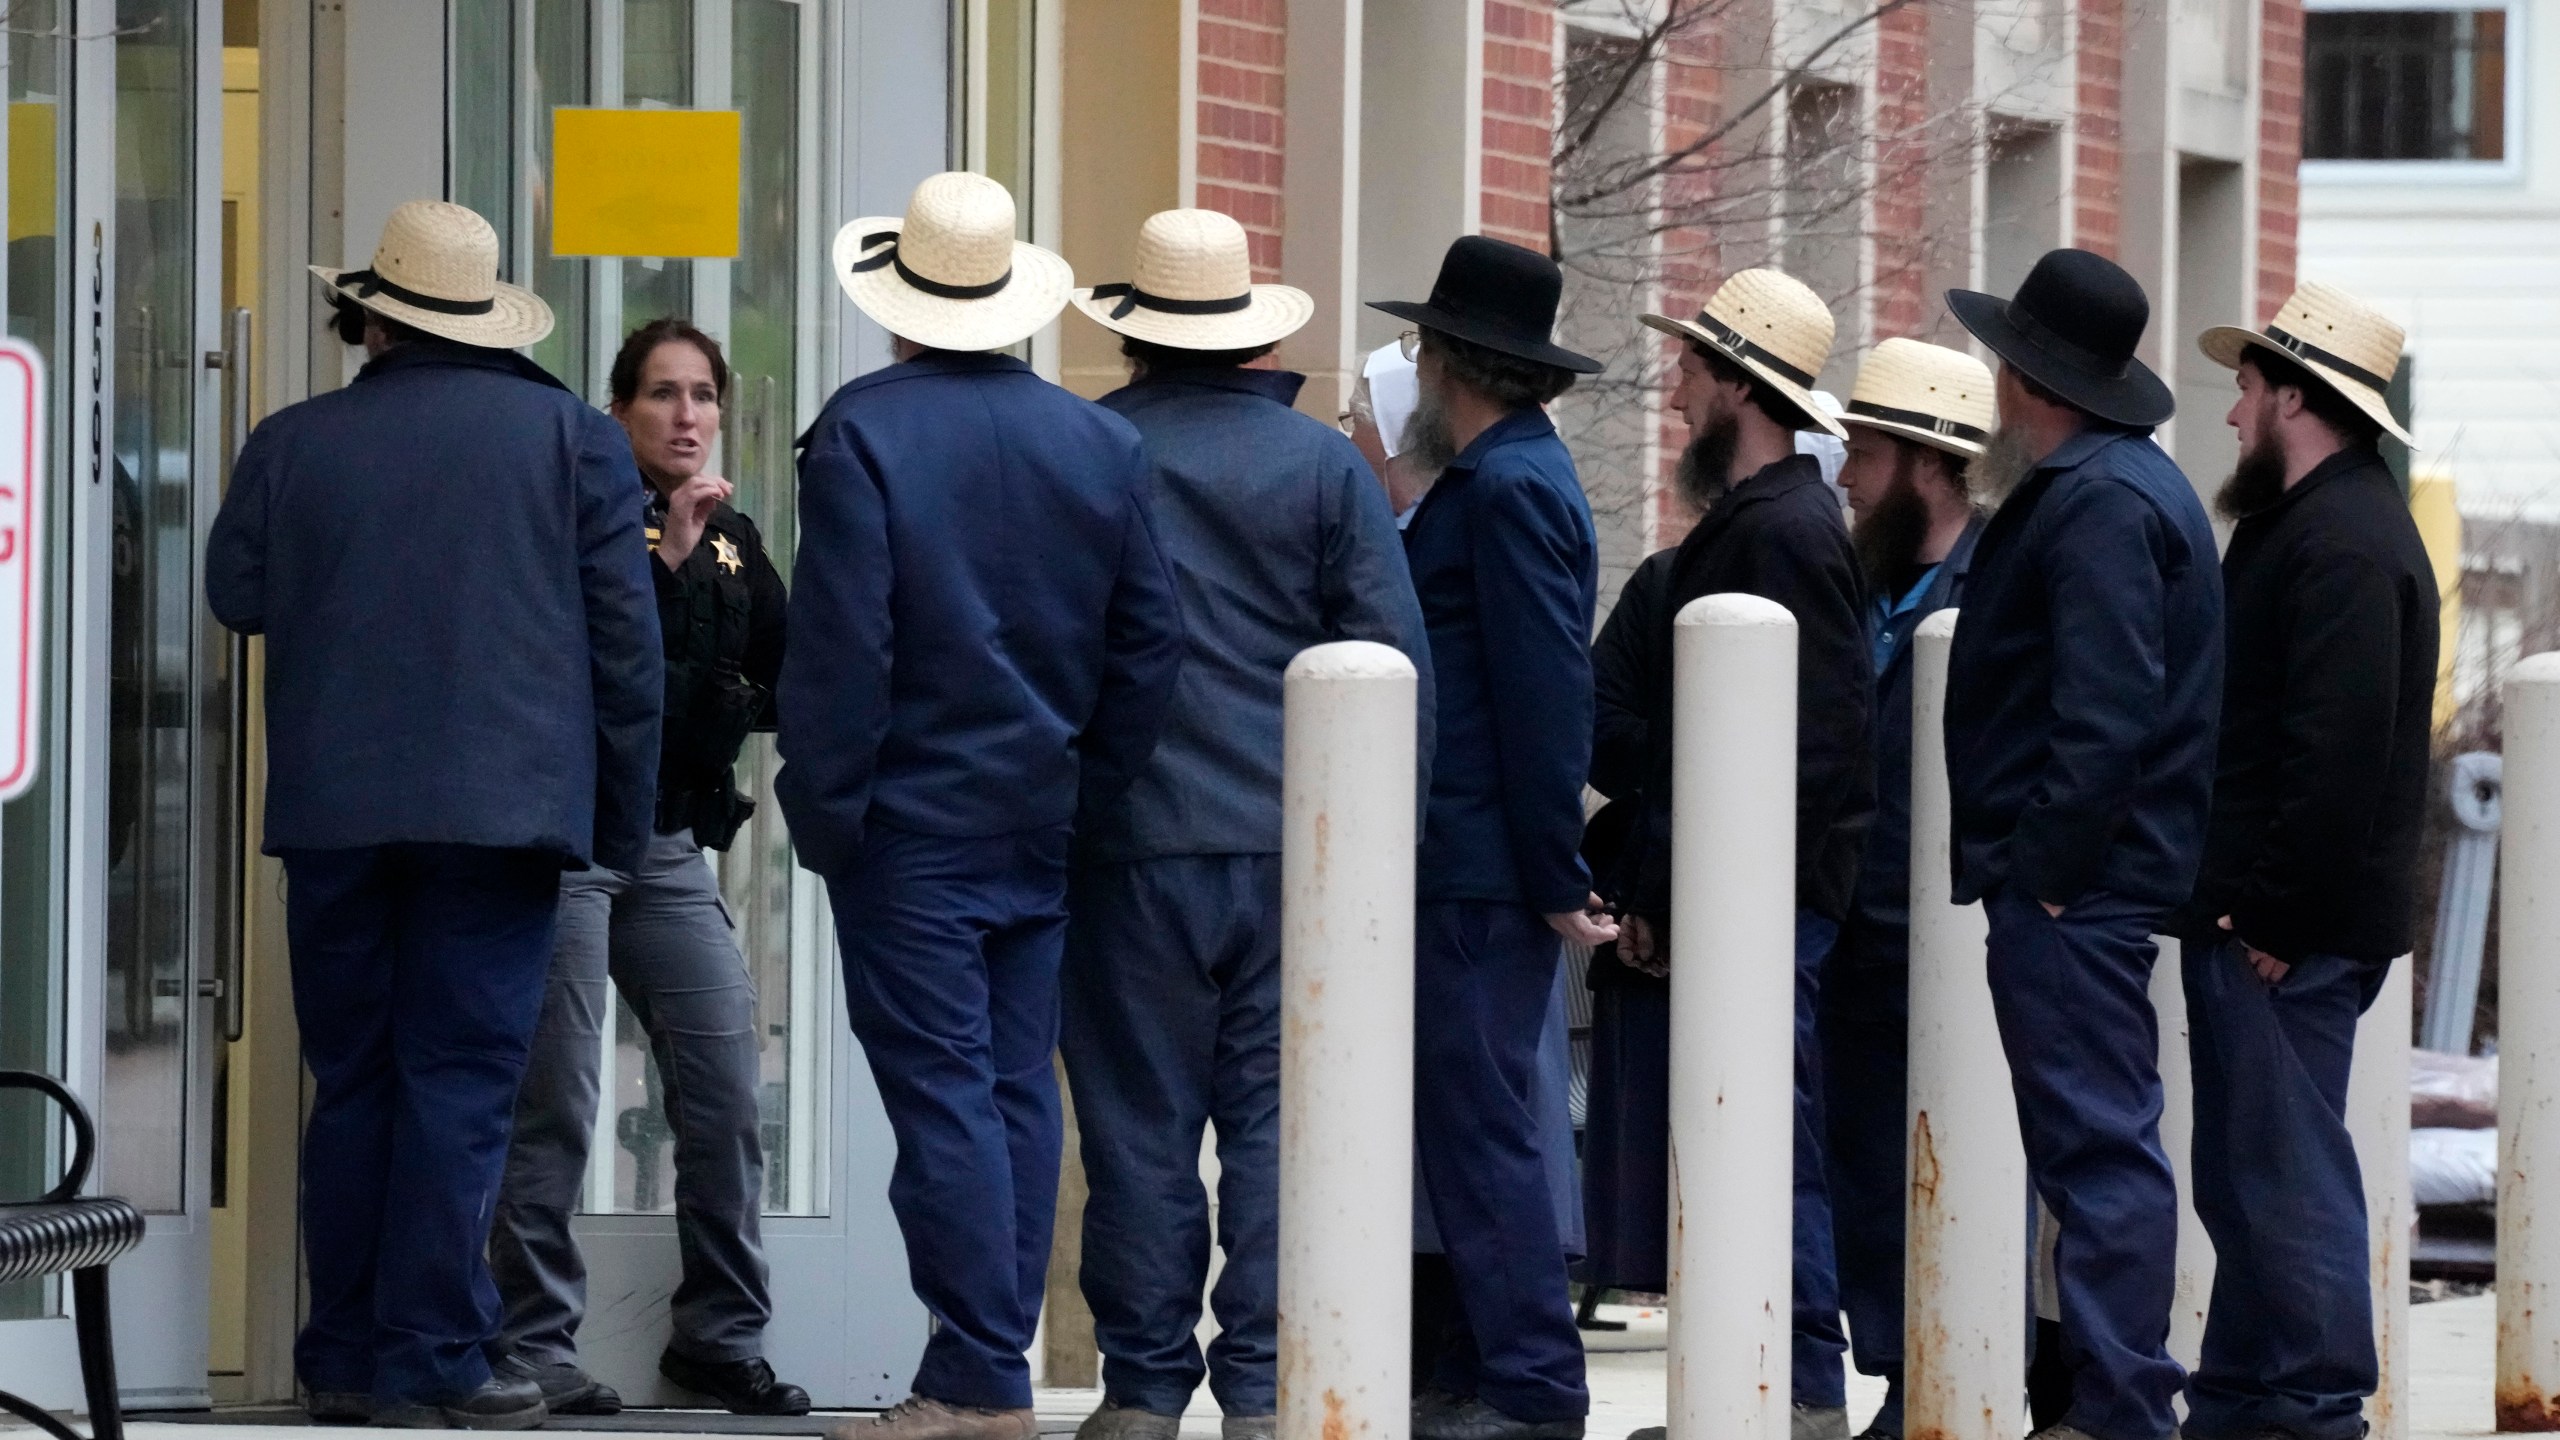 FILE - A group of Amish gather outside the Crawford County Judicial Center in Meadville, Pa., following a preliminary hearing, March 15, 2024, for Shawn C. Cranston, 52, of Corry, Pa., who is accused of killing Rebekah Byler and her unborn child inside the Byler home near Spartansburg, Pa., on Feb. 26. Six guns, a variety of ammunition and a pair of sneakers that may match tread marks left at the murder scene were seized during searches of the home and vehicle of a man accused of killing the pregnant Amish woman in her rural Pennsylvania home a month ago. (AP Photo/Gene J. Puskar, file)